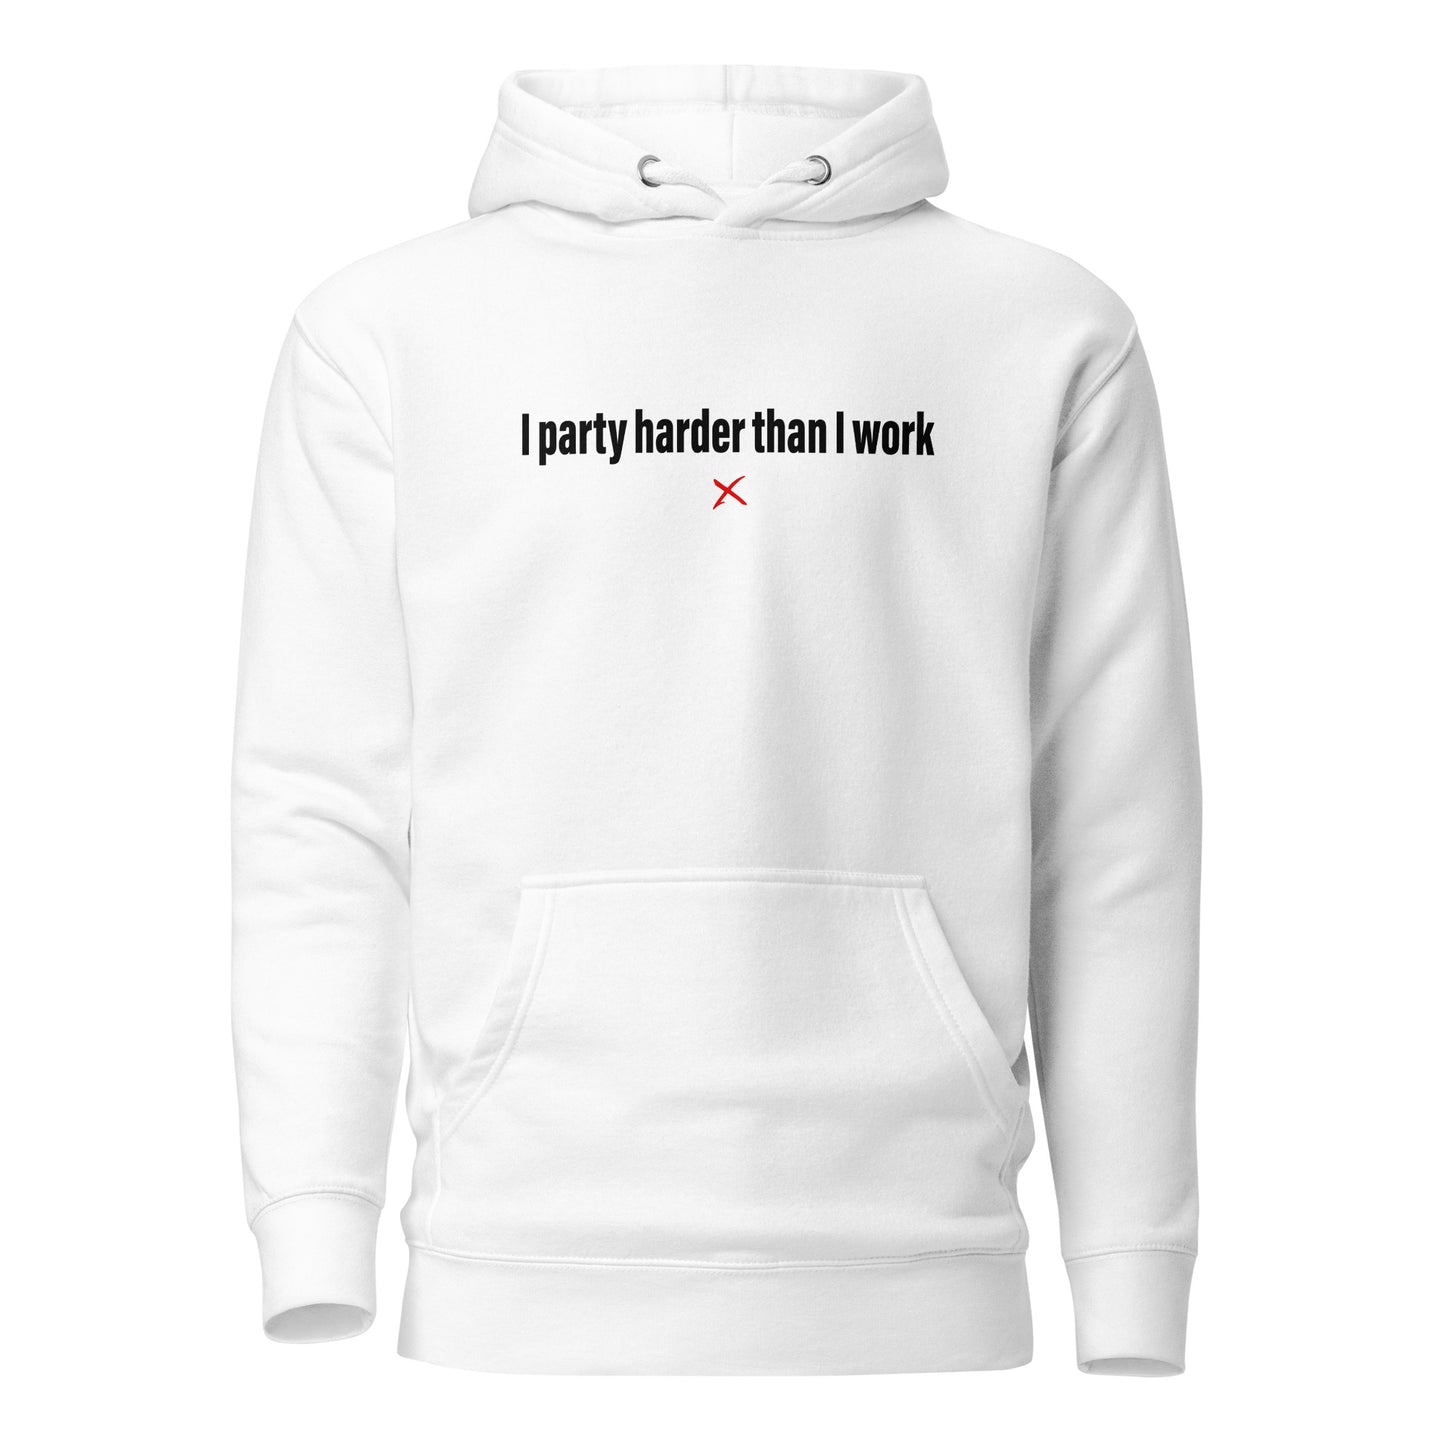 I party harder than I work - Hoodie